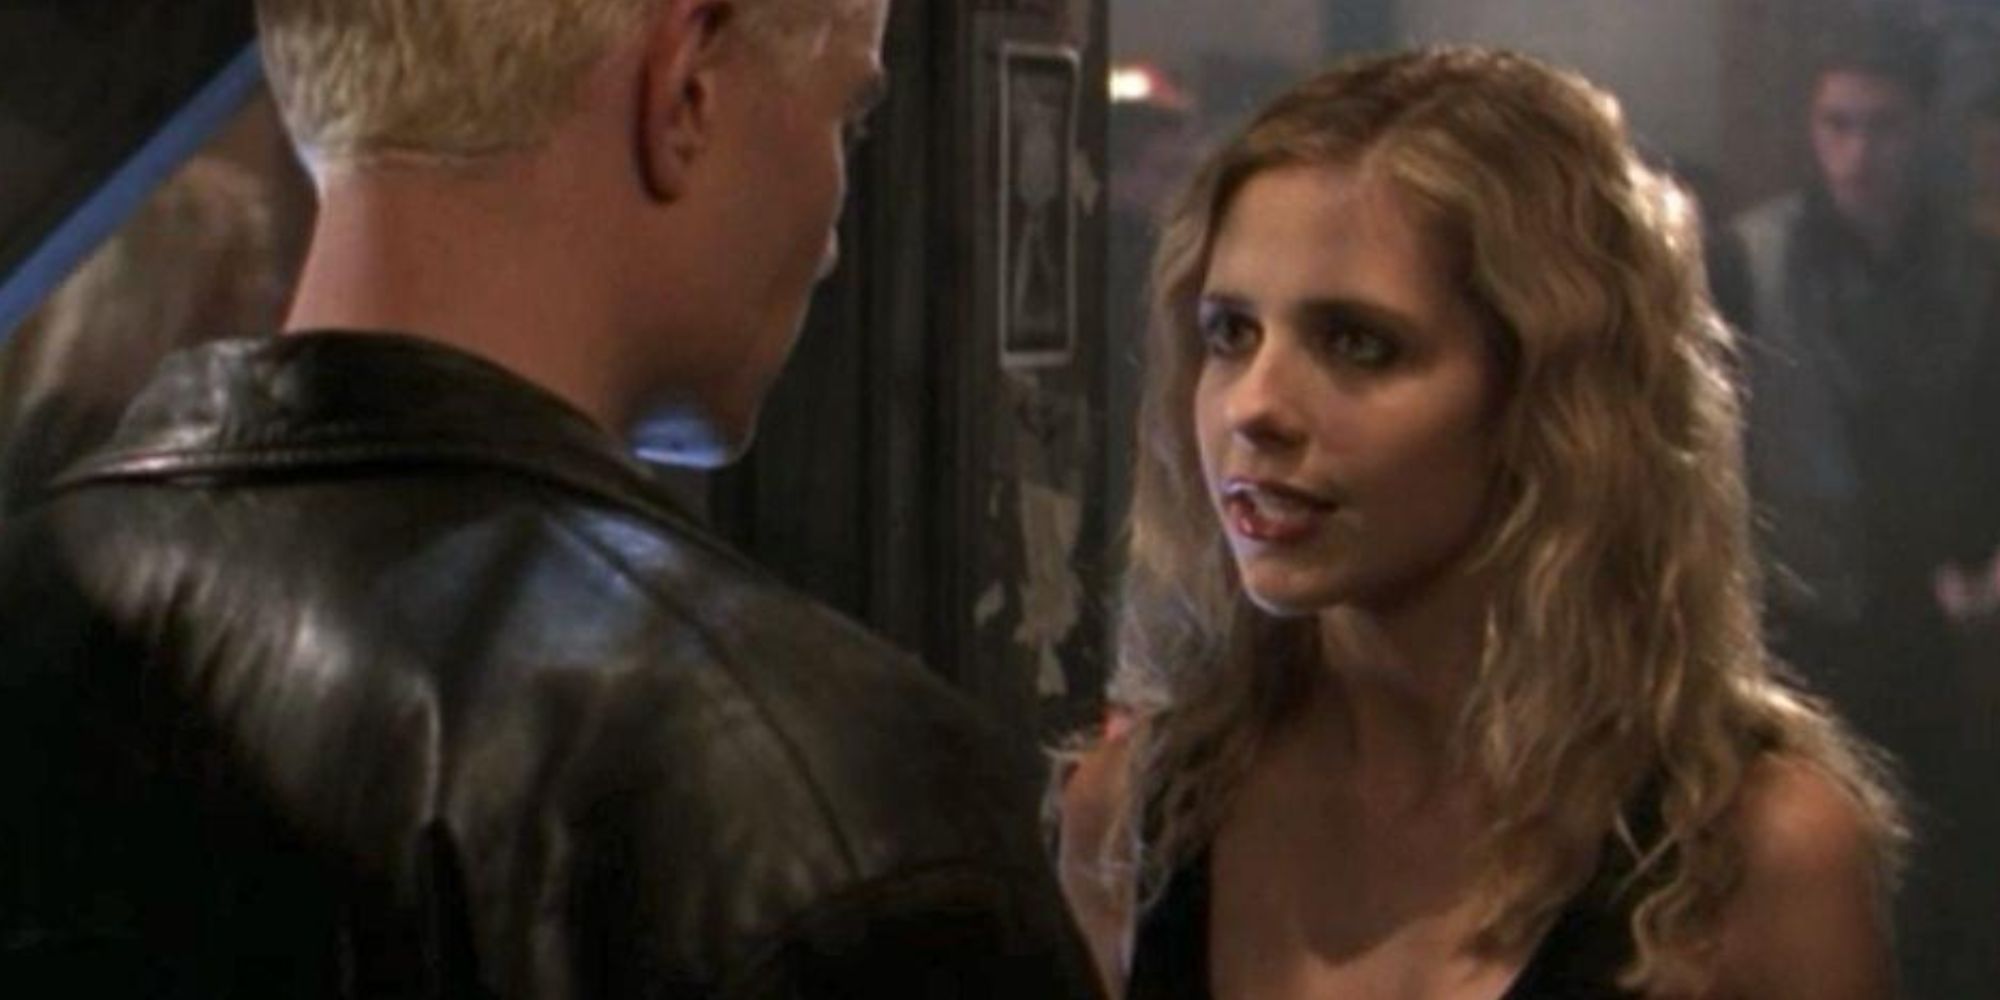 Spike and Buffy in Conversation at a Club in Buffy the Vampire Slayer